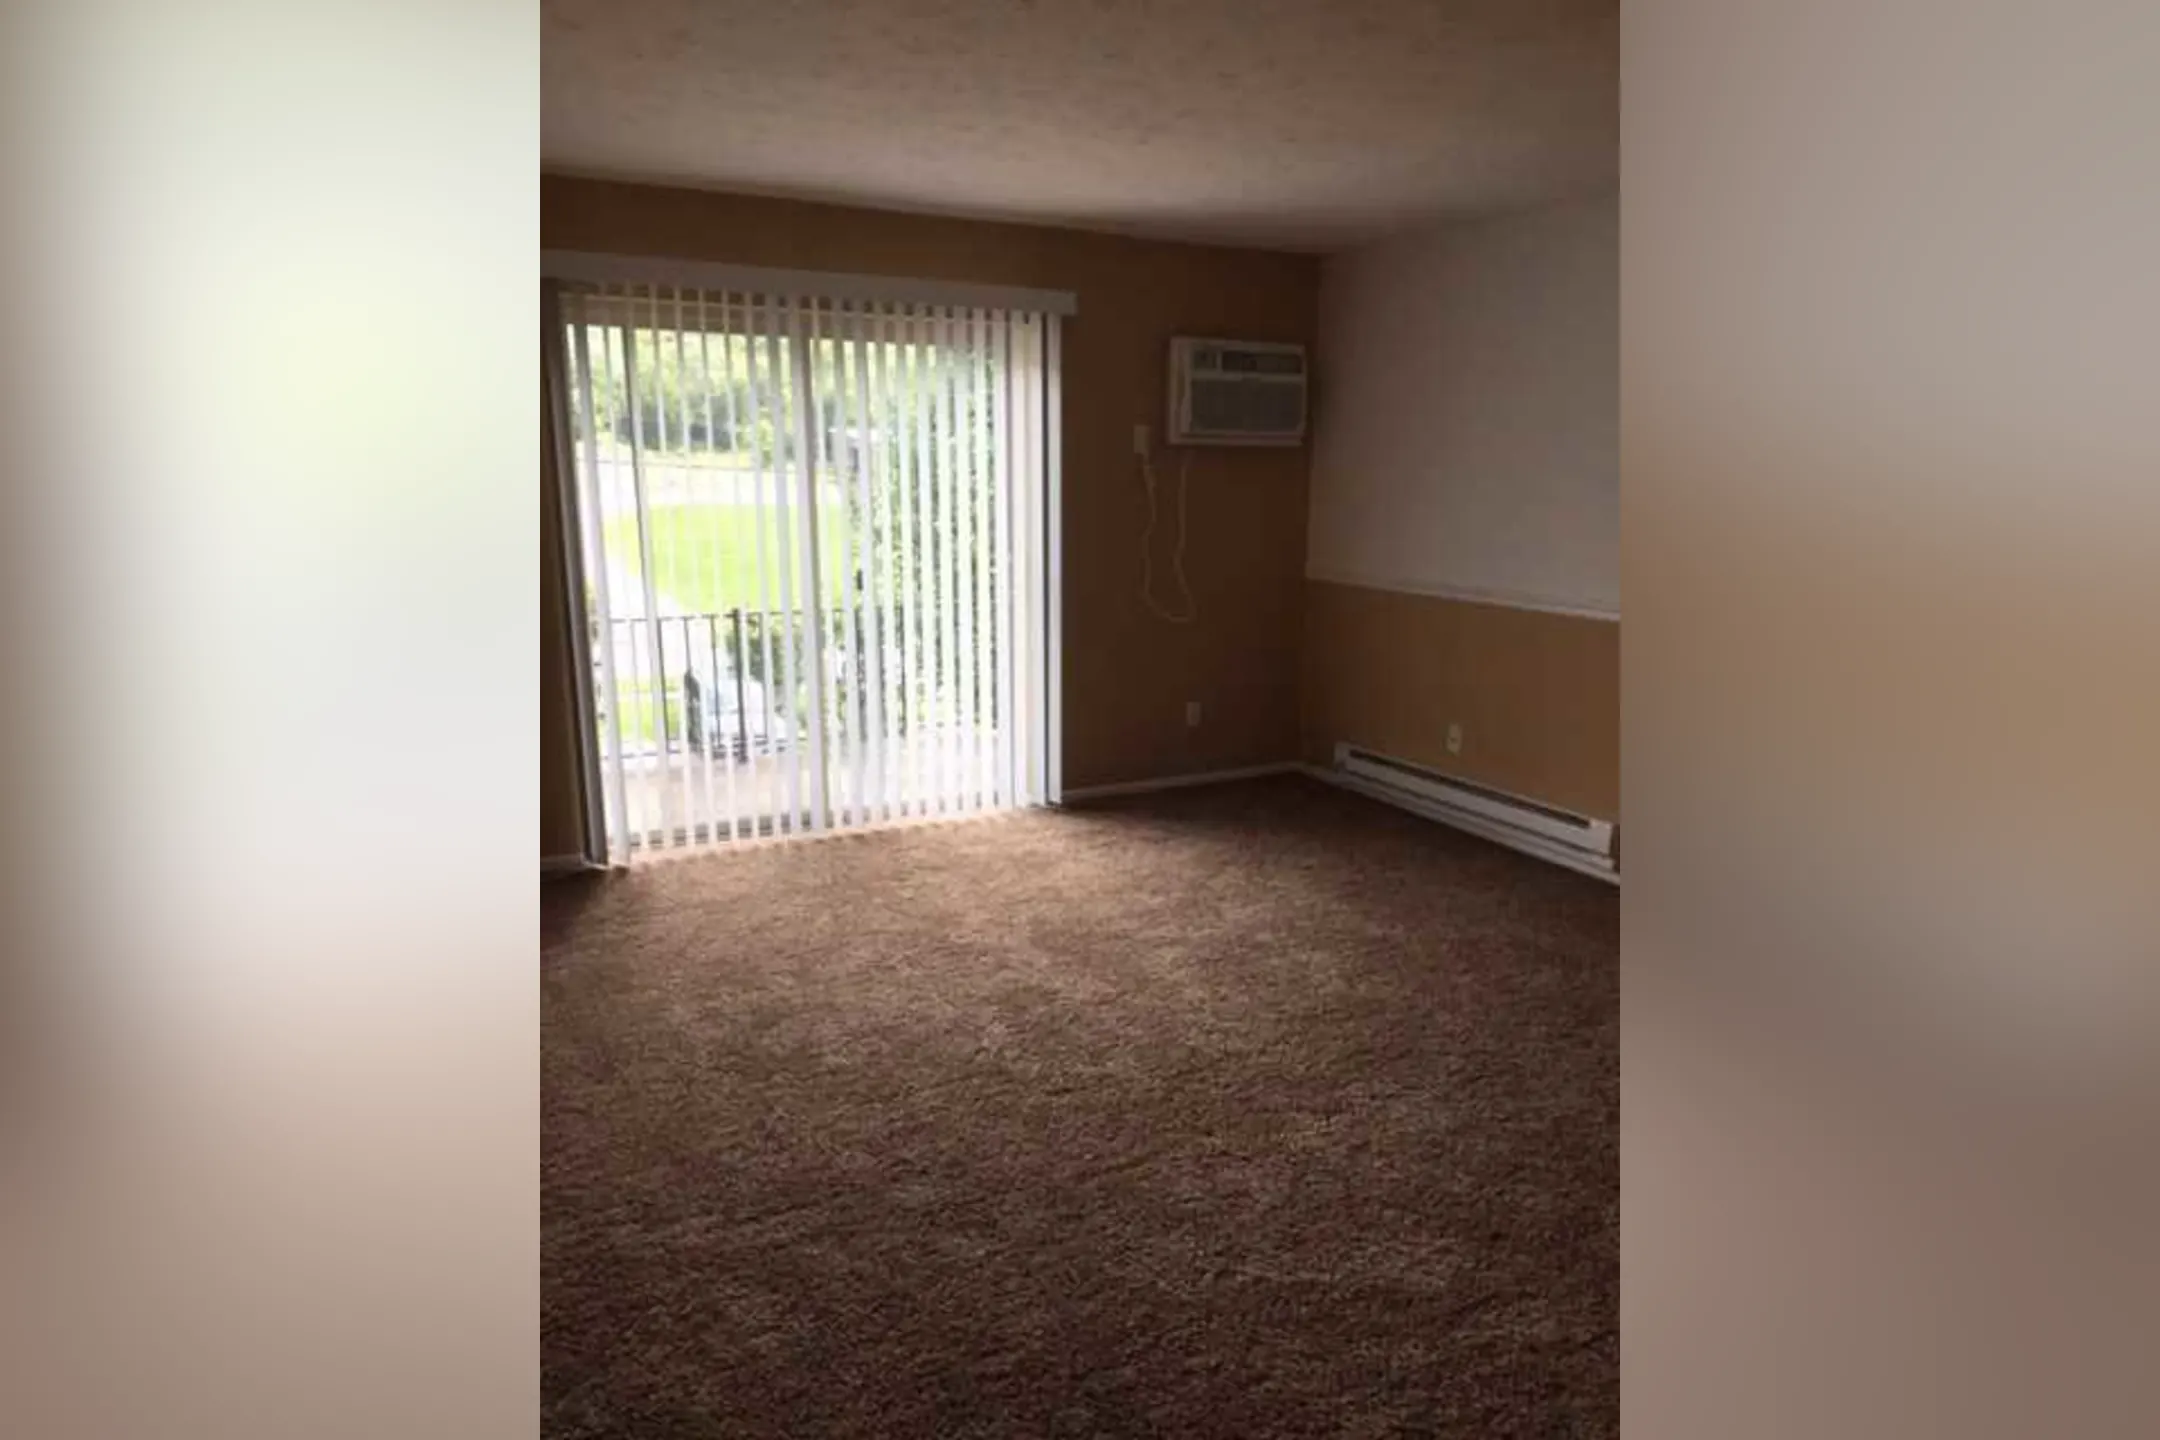 Living Room - Harbor View Apartments - Addyston, OH